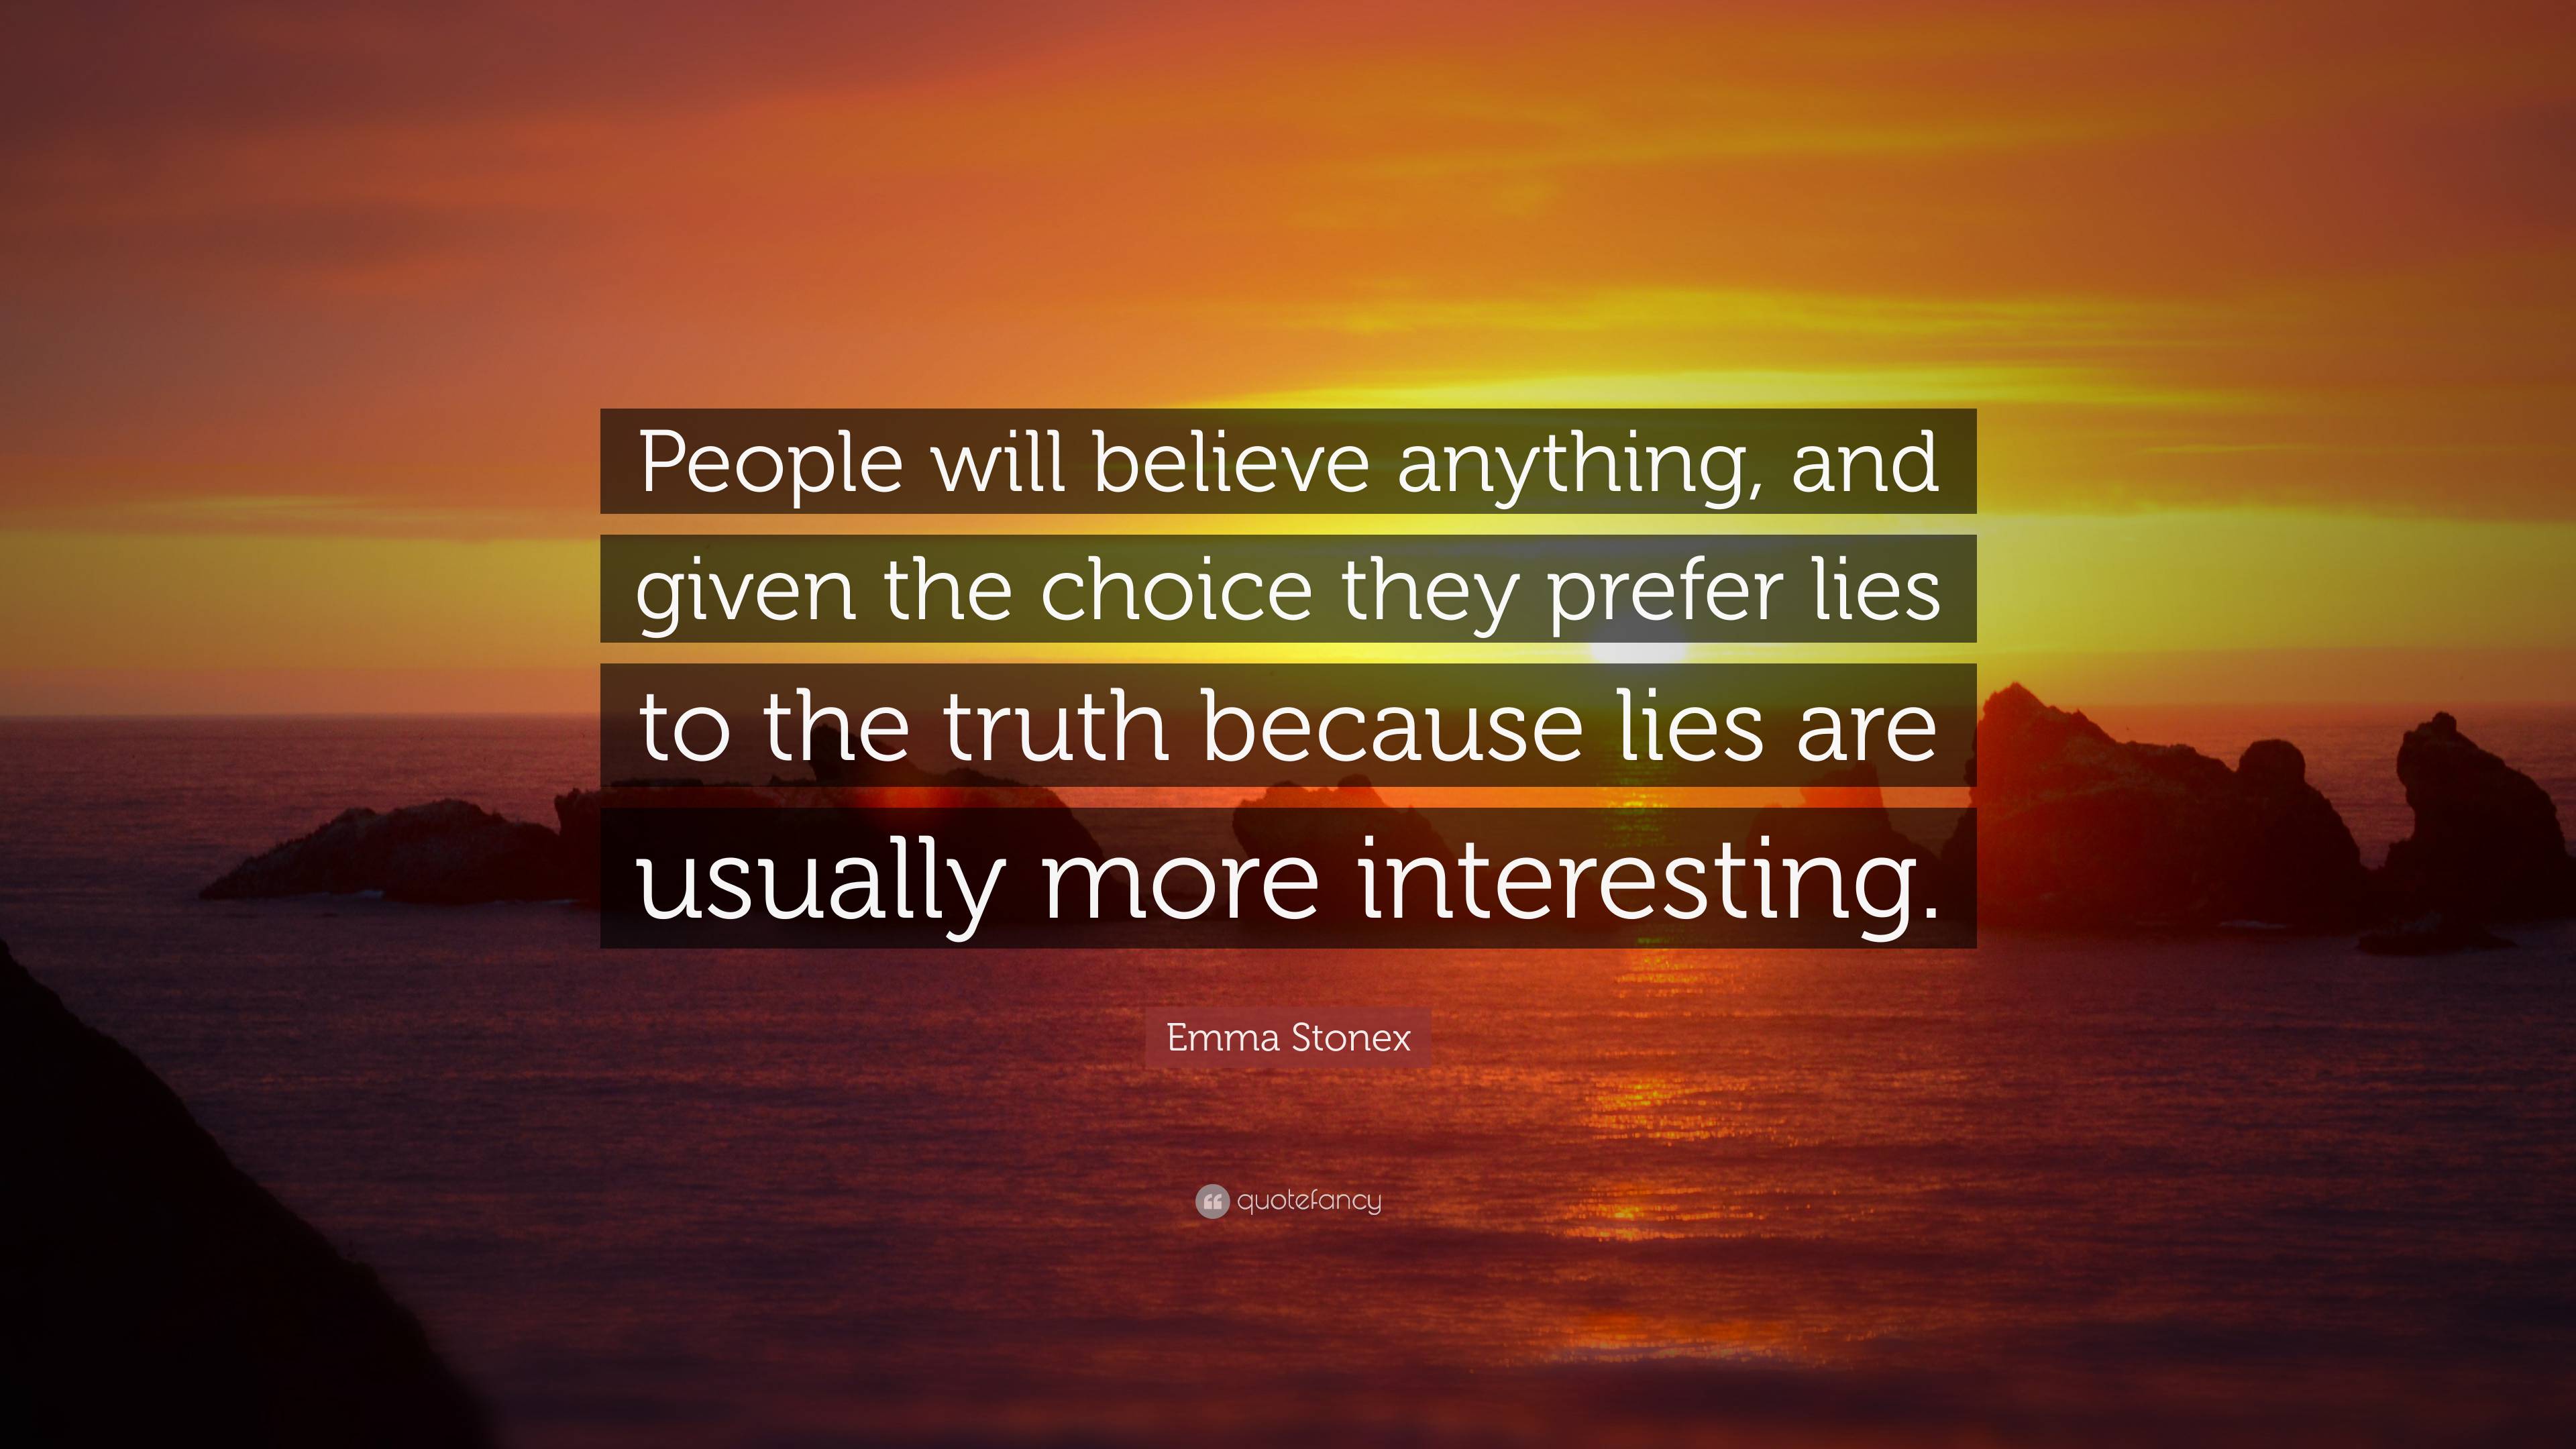 Emma Stonex Quote: “People will believe anything, and given the choice ...